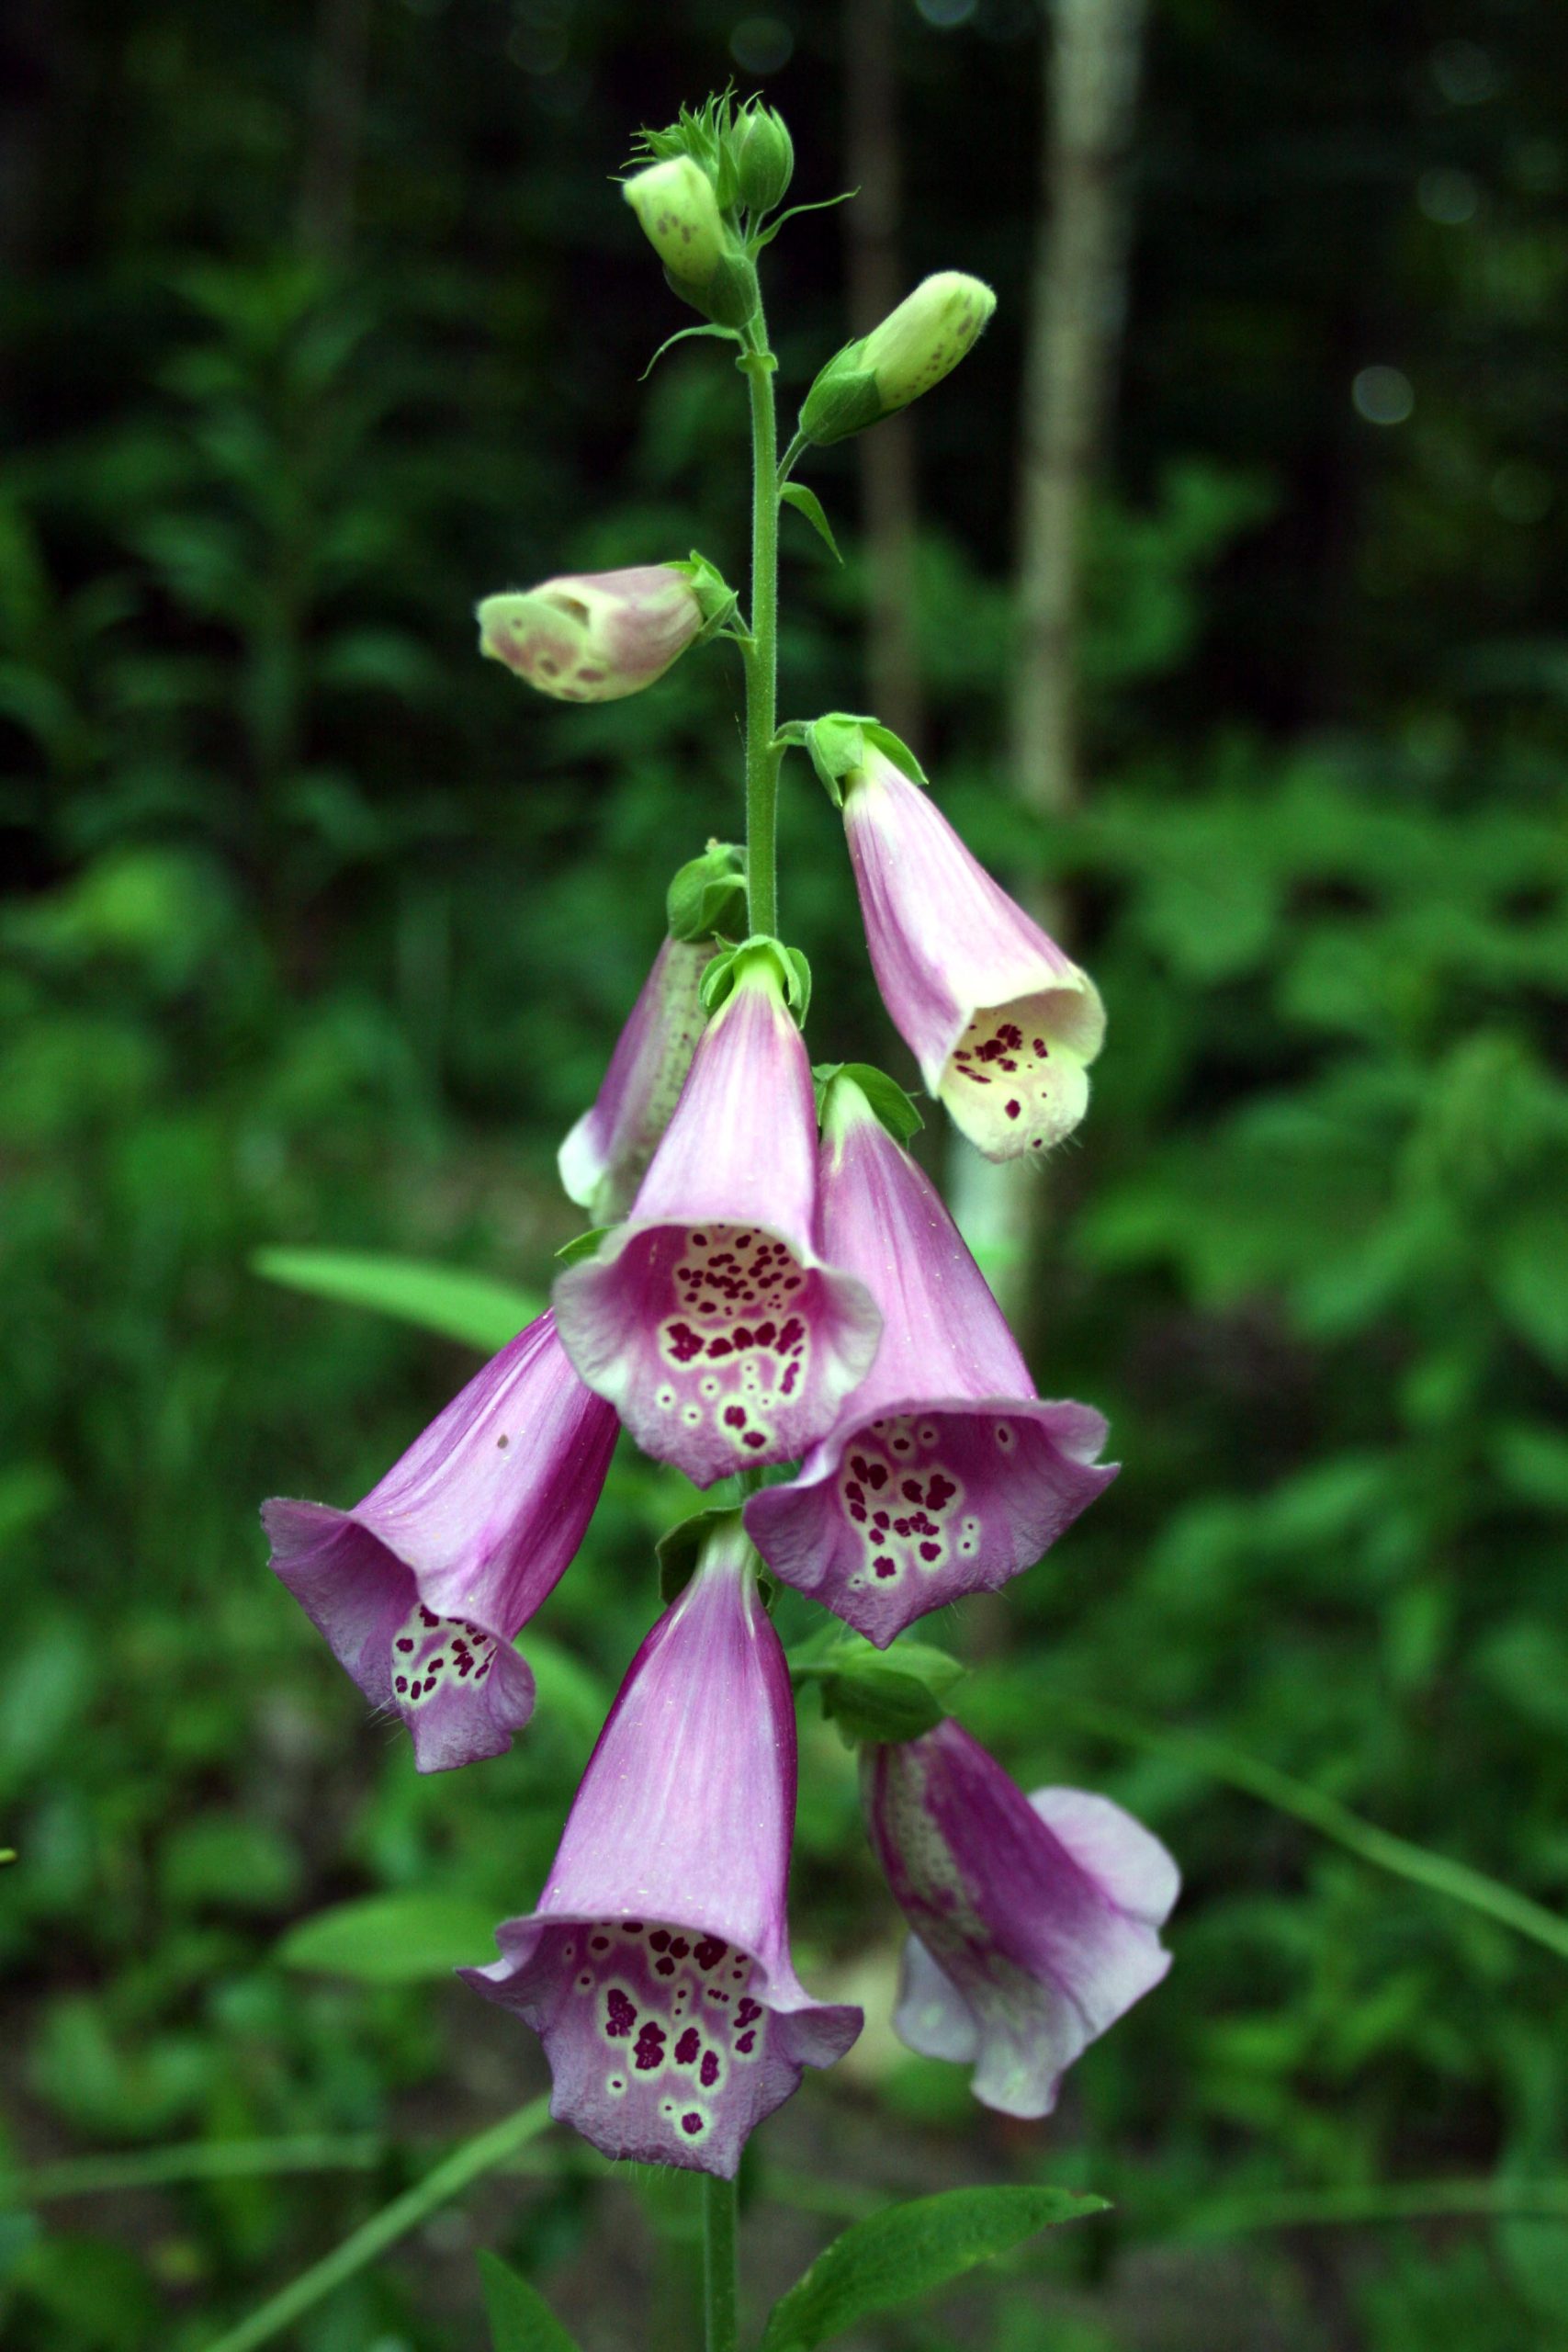 Digitalis (user submitted)